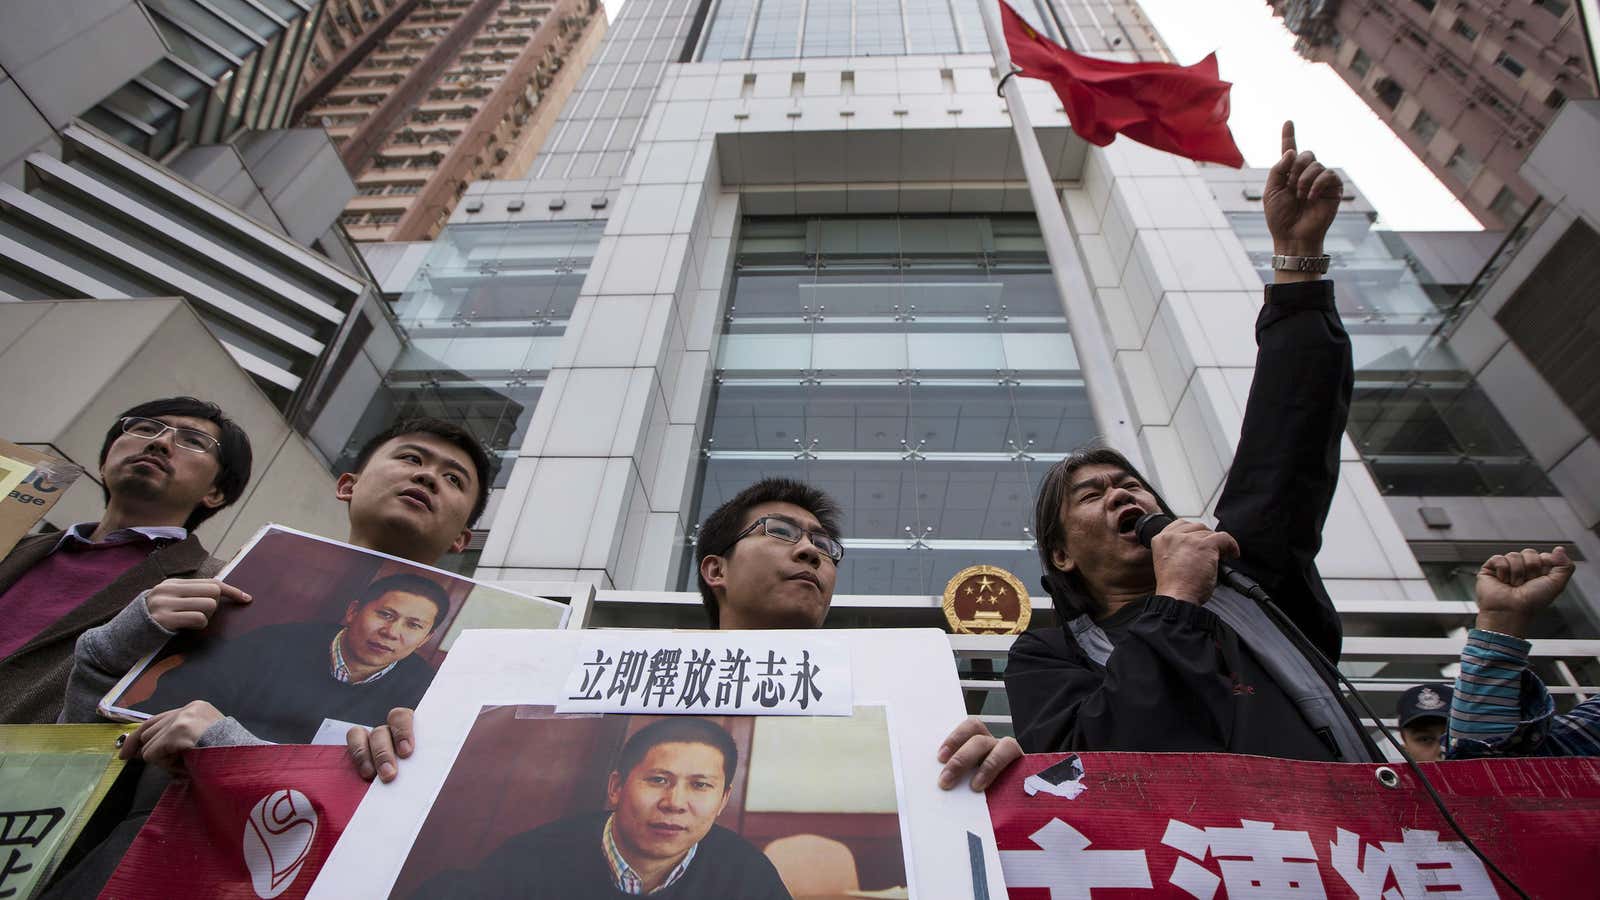 Activists in Hong Kong call for Xu Zhiyong’s verdict to be overturned.